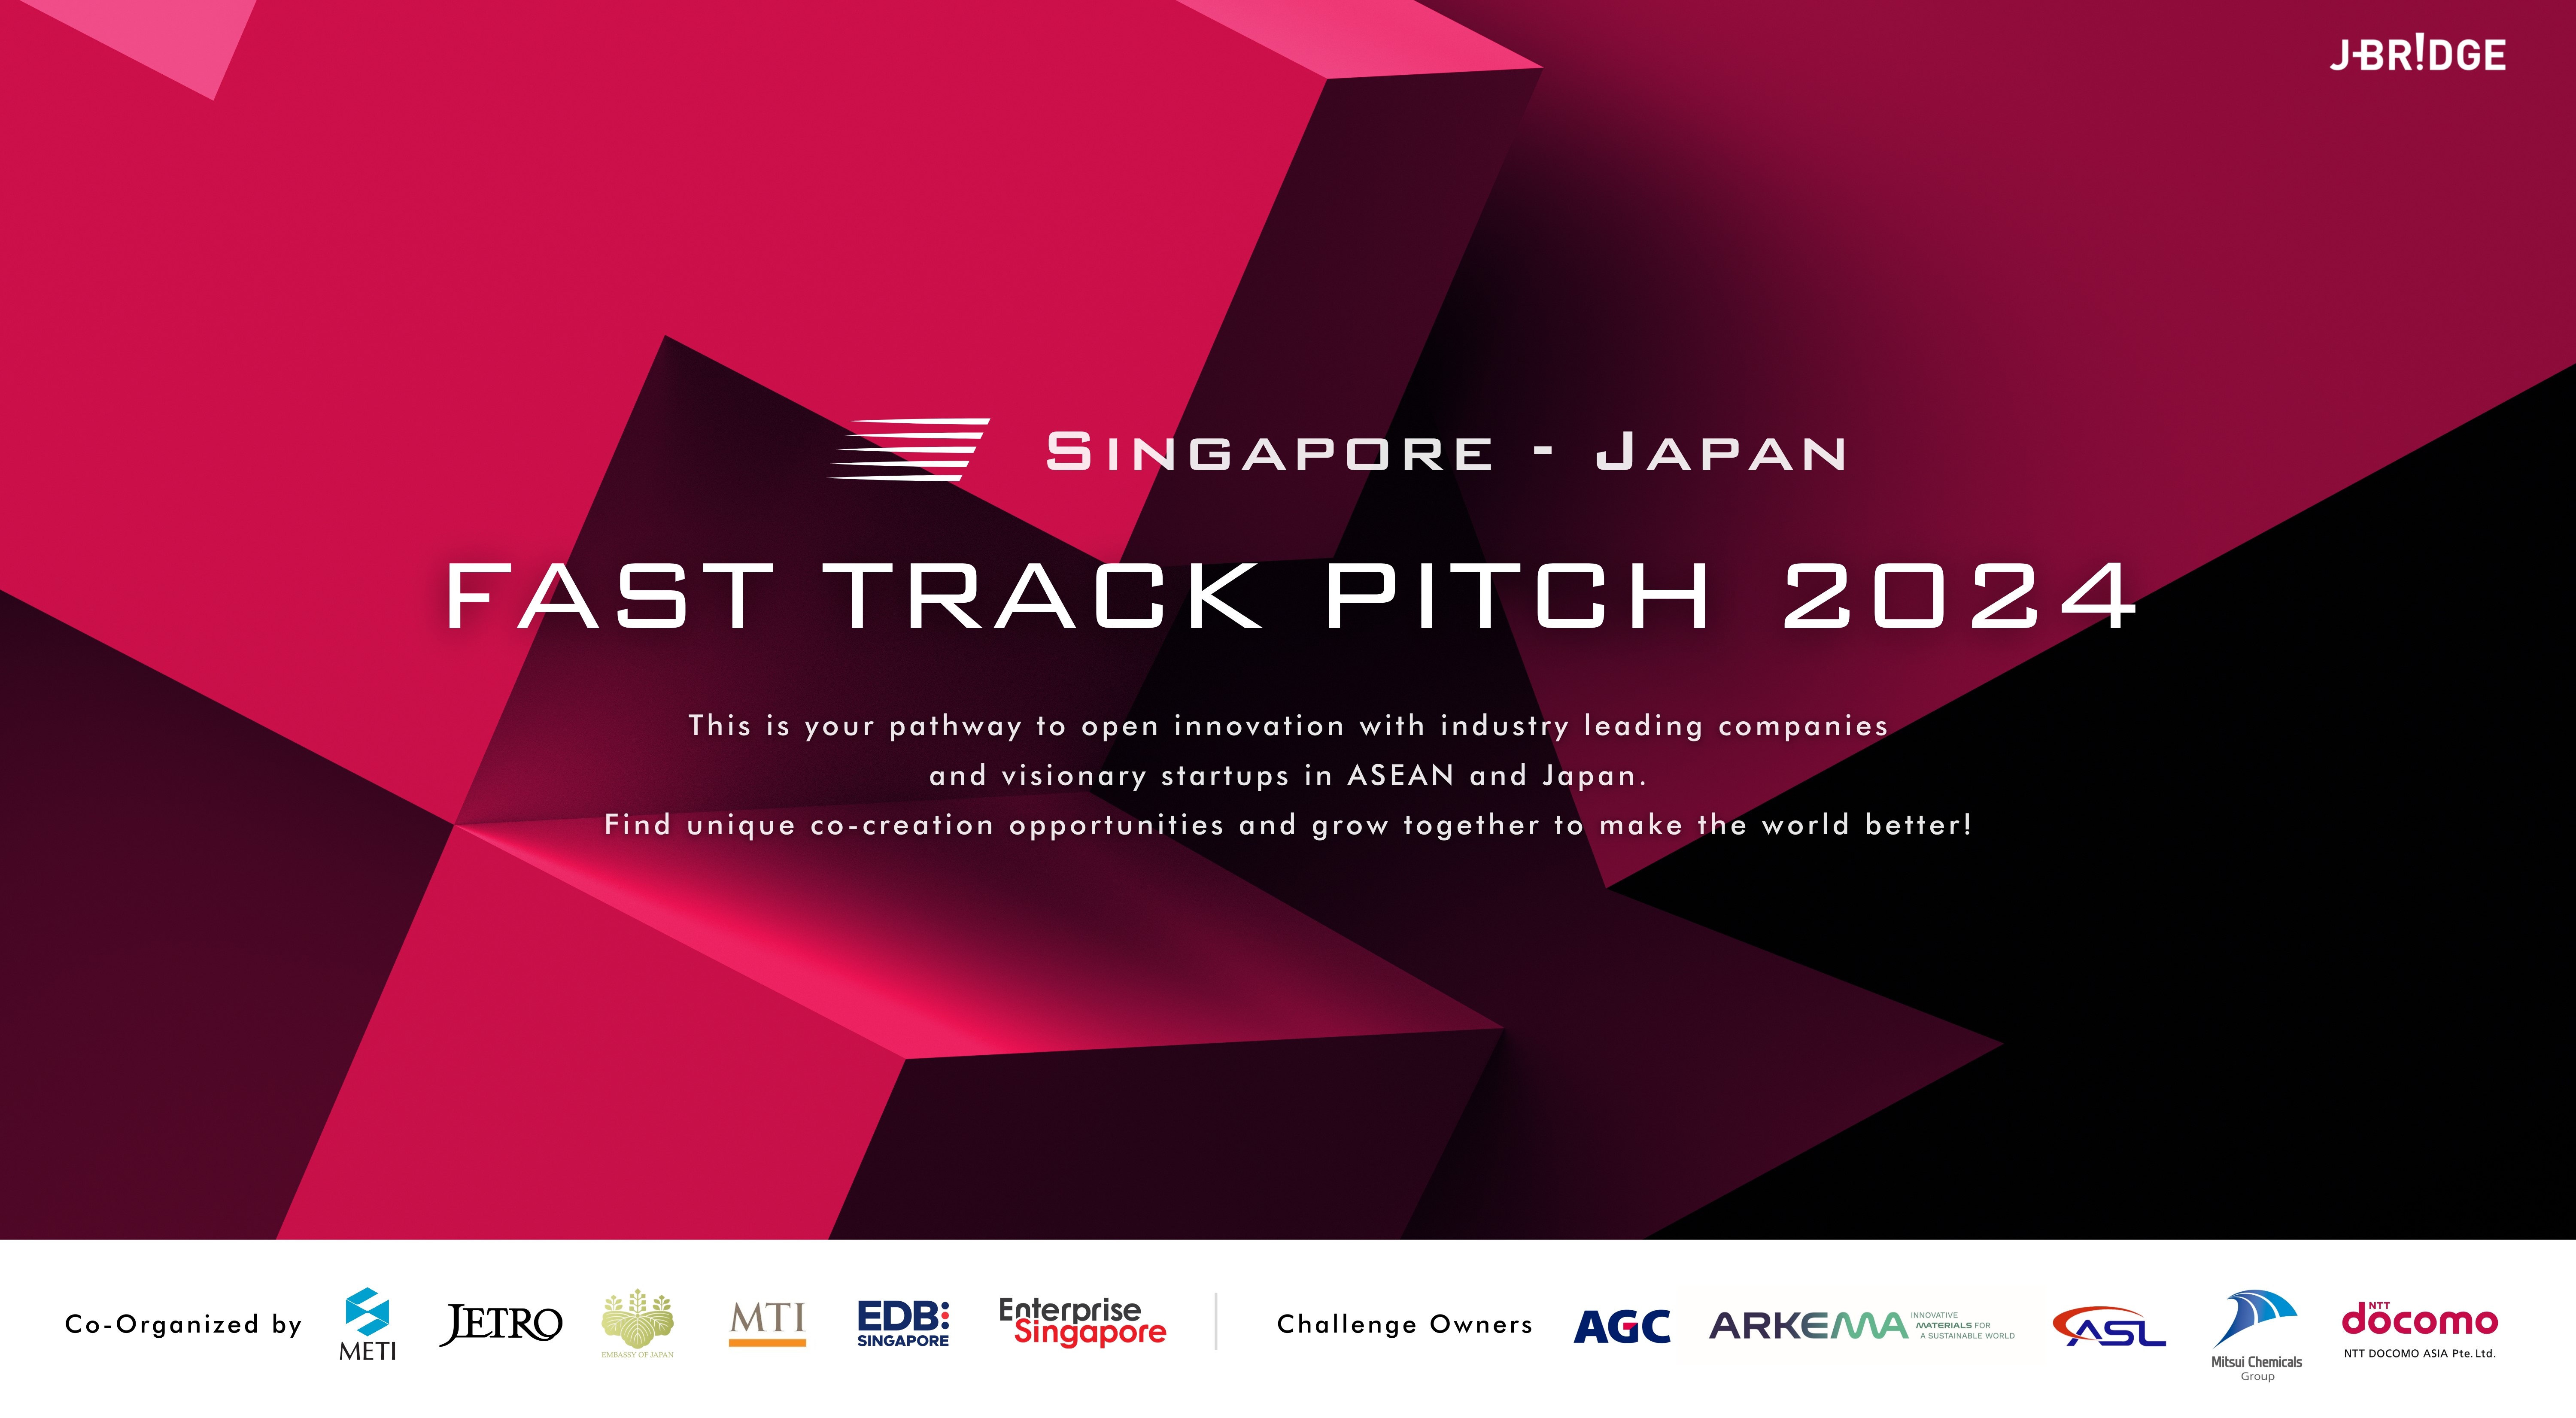 Singapore-Japan Fast Track Pitch Event 2024